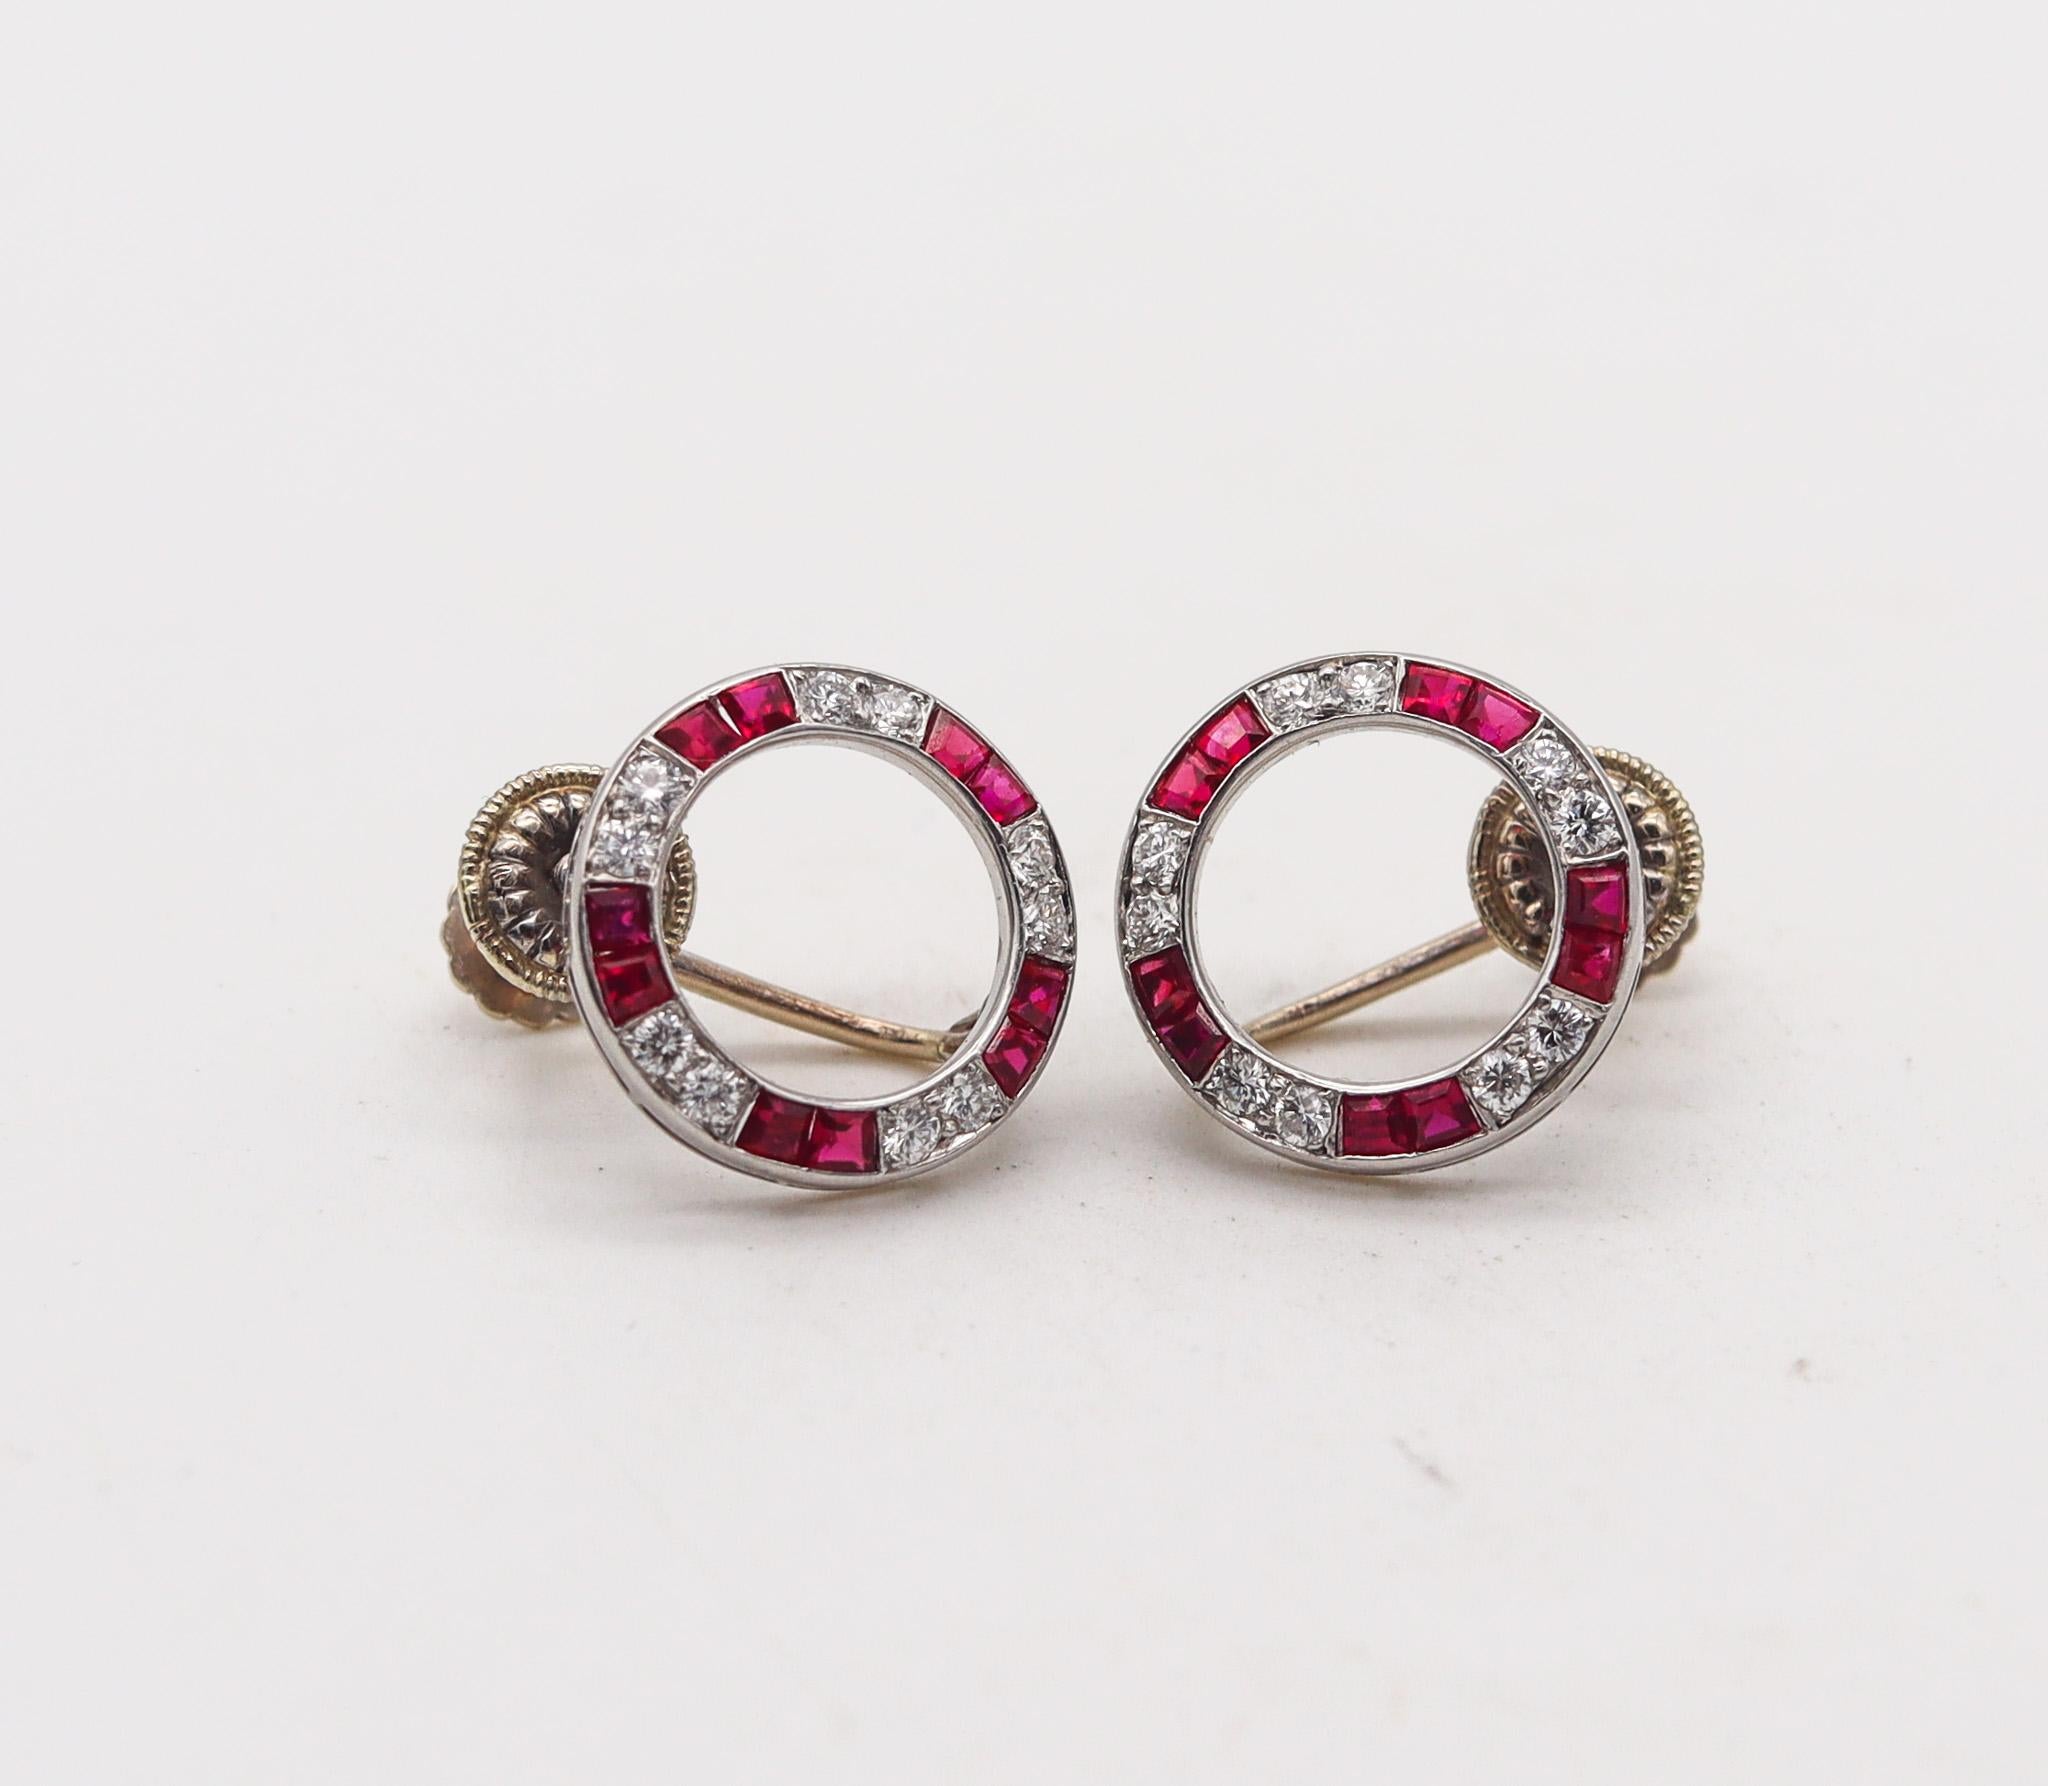 French Cut Raymond Yard 1935 Art Deco Earrings In Platinum With 3.09 Ctw Rubies Diamonds For Sale